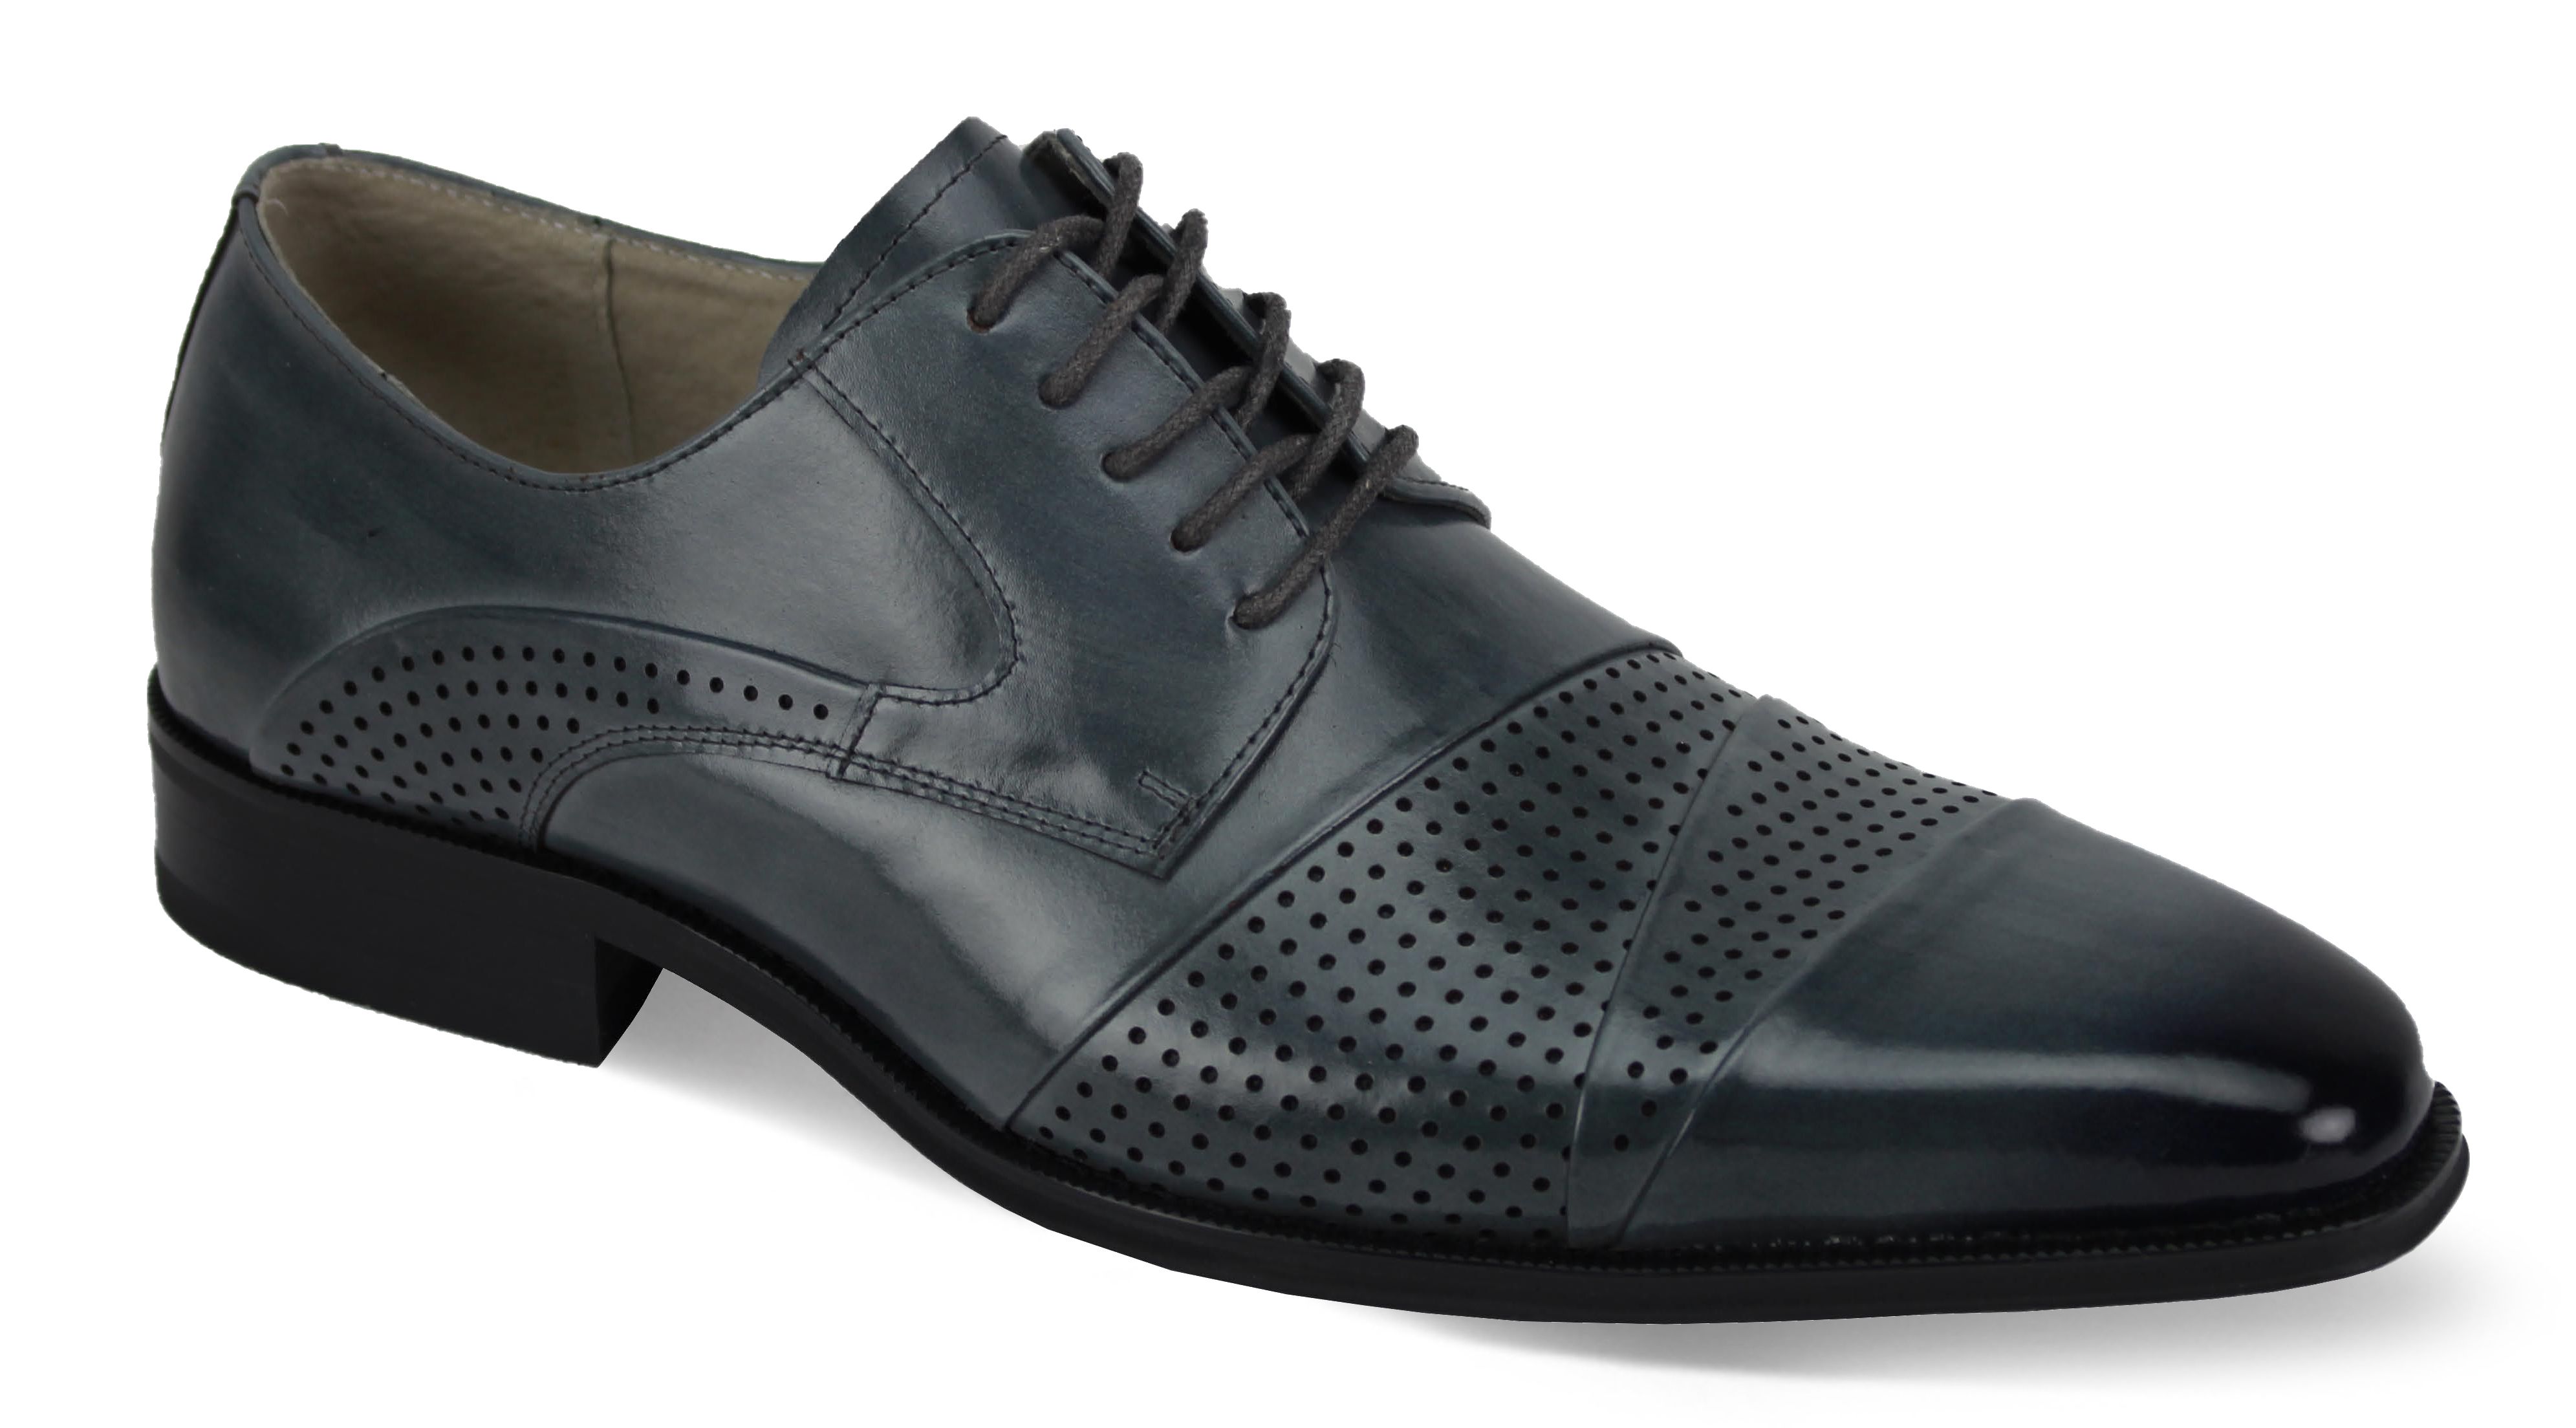 Giovanni Men's Outlet Leather Dress Shoe - Layered Perforations